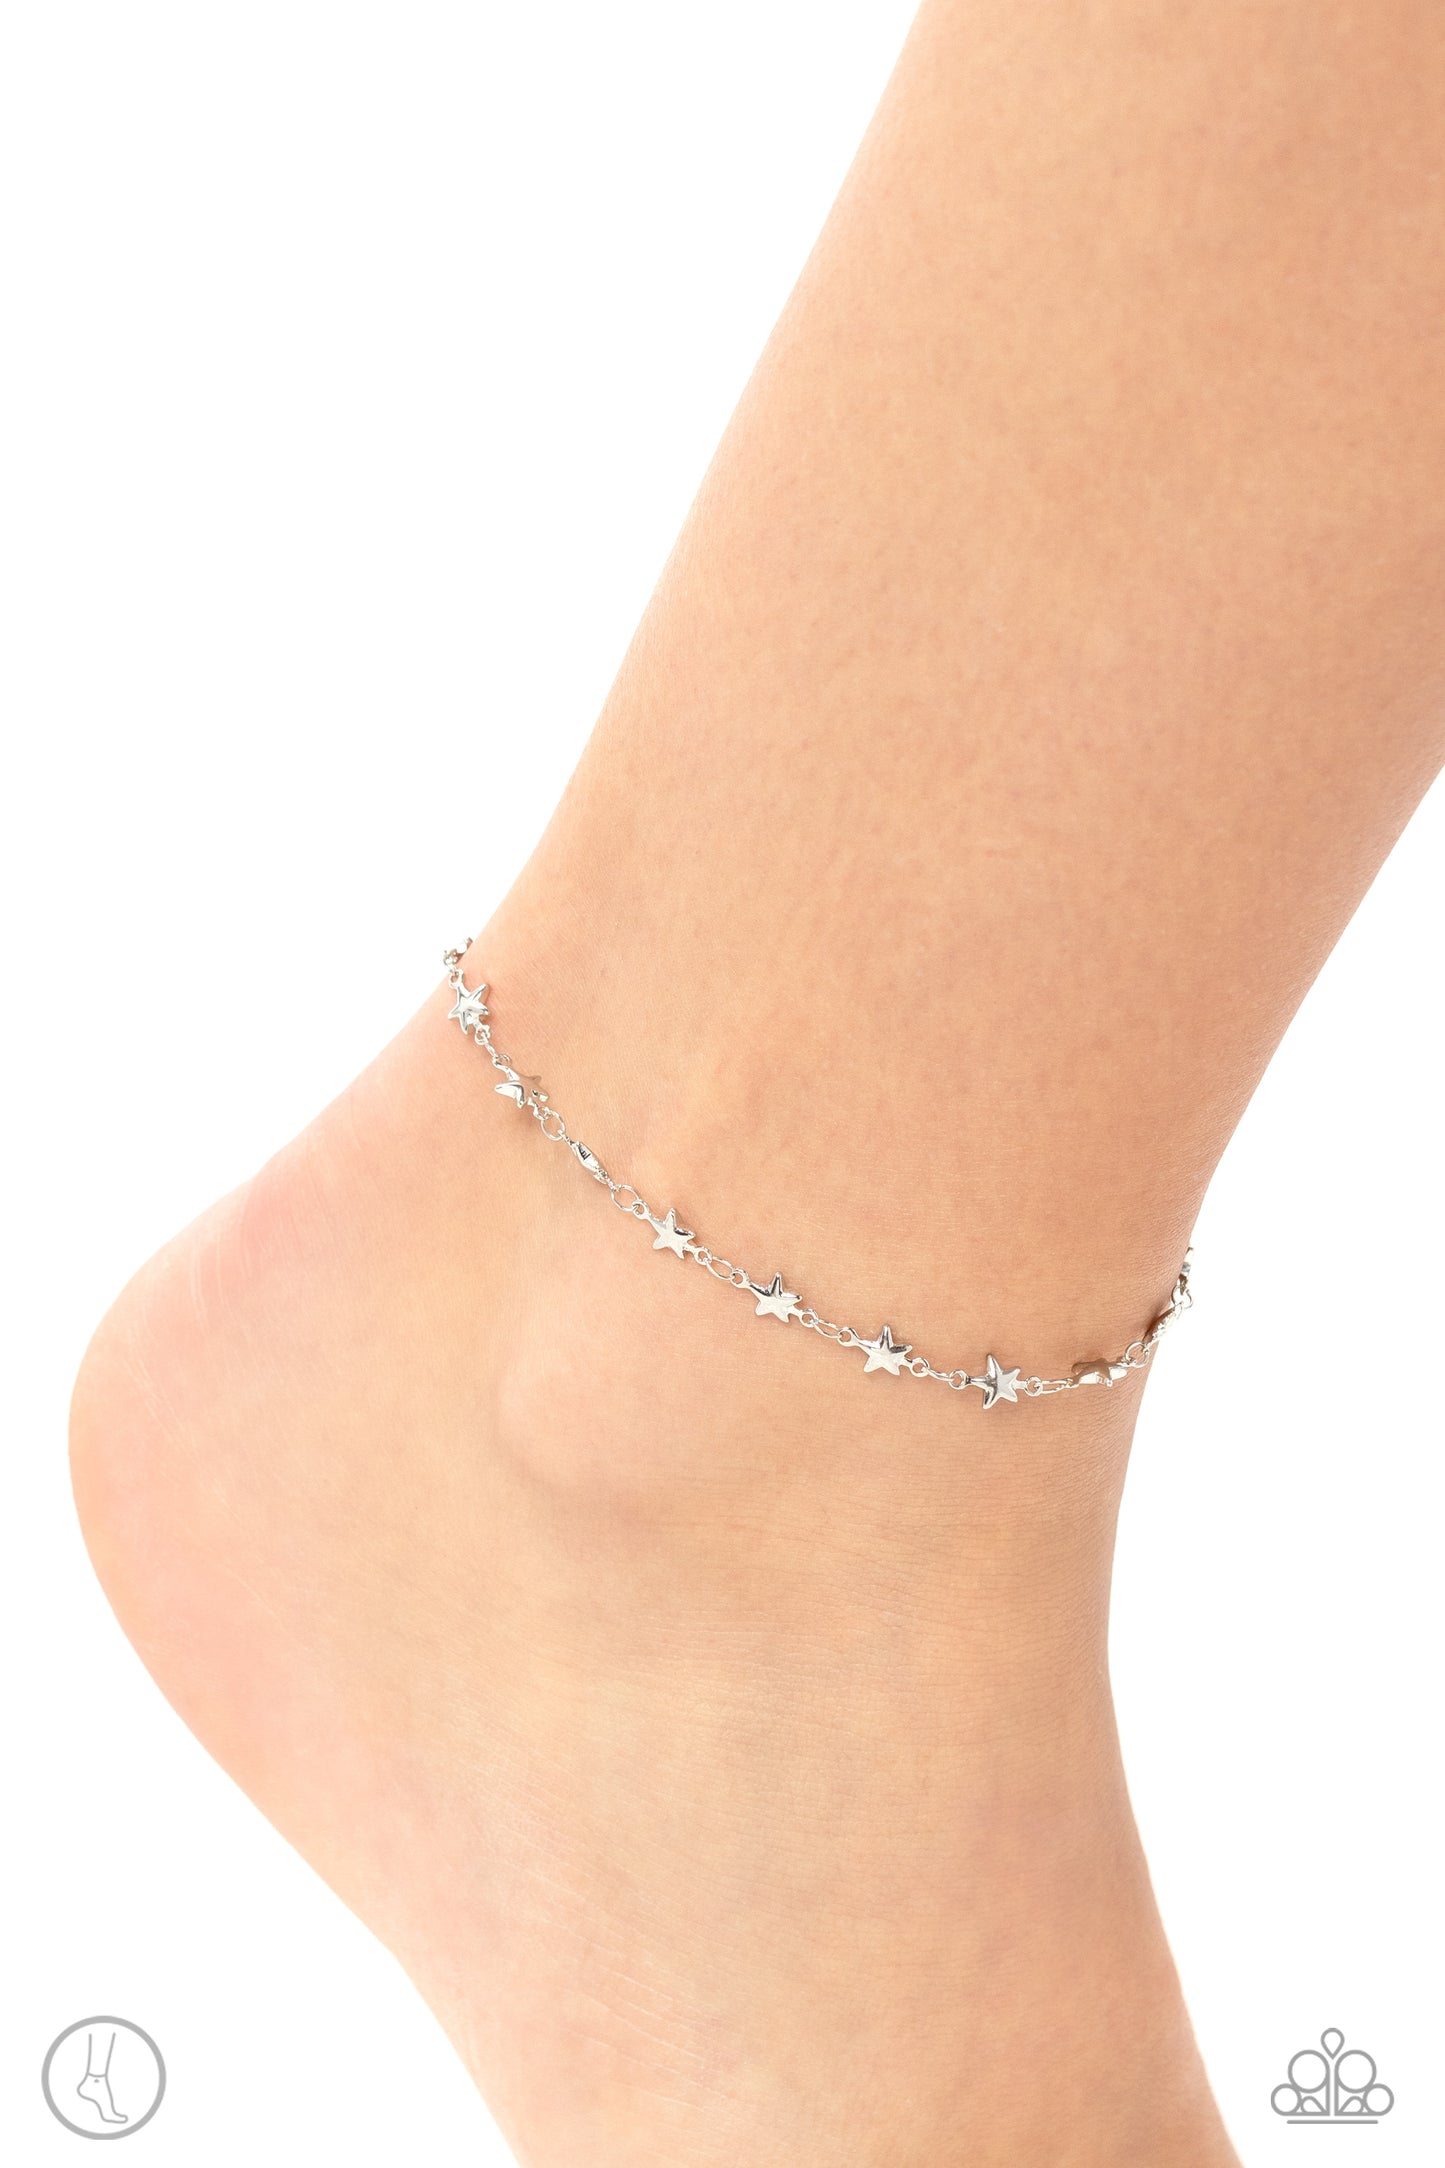 Paparazzi Anklets - Starry Swing Dance - Silver